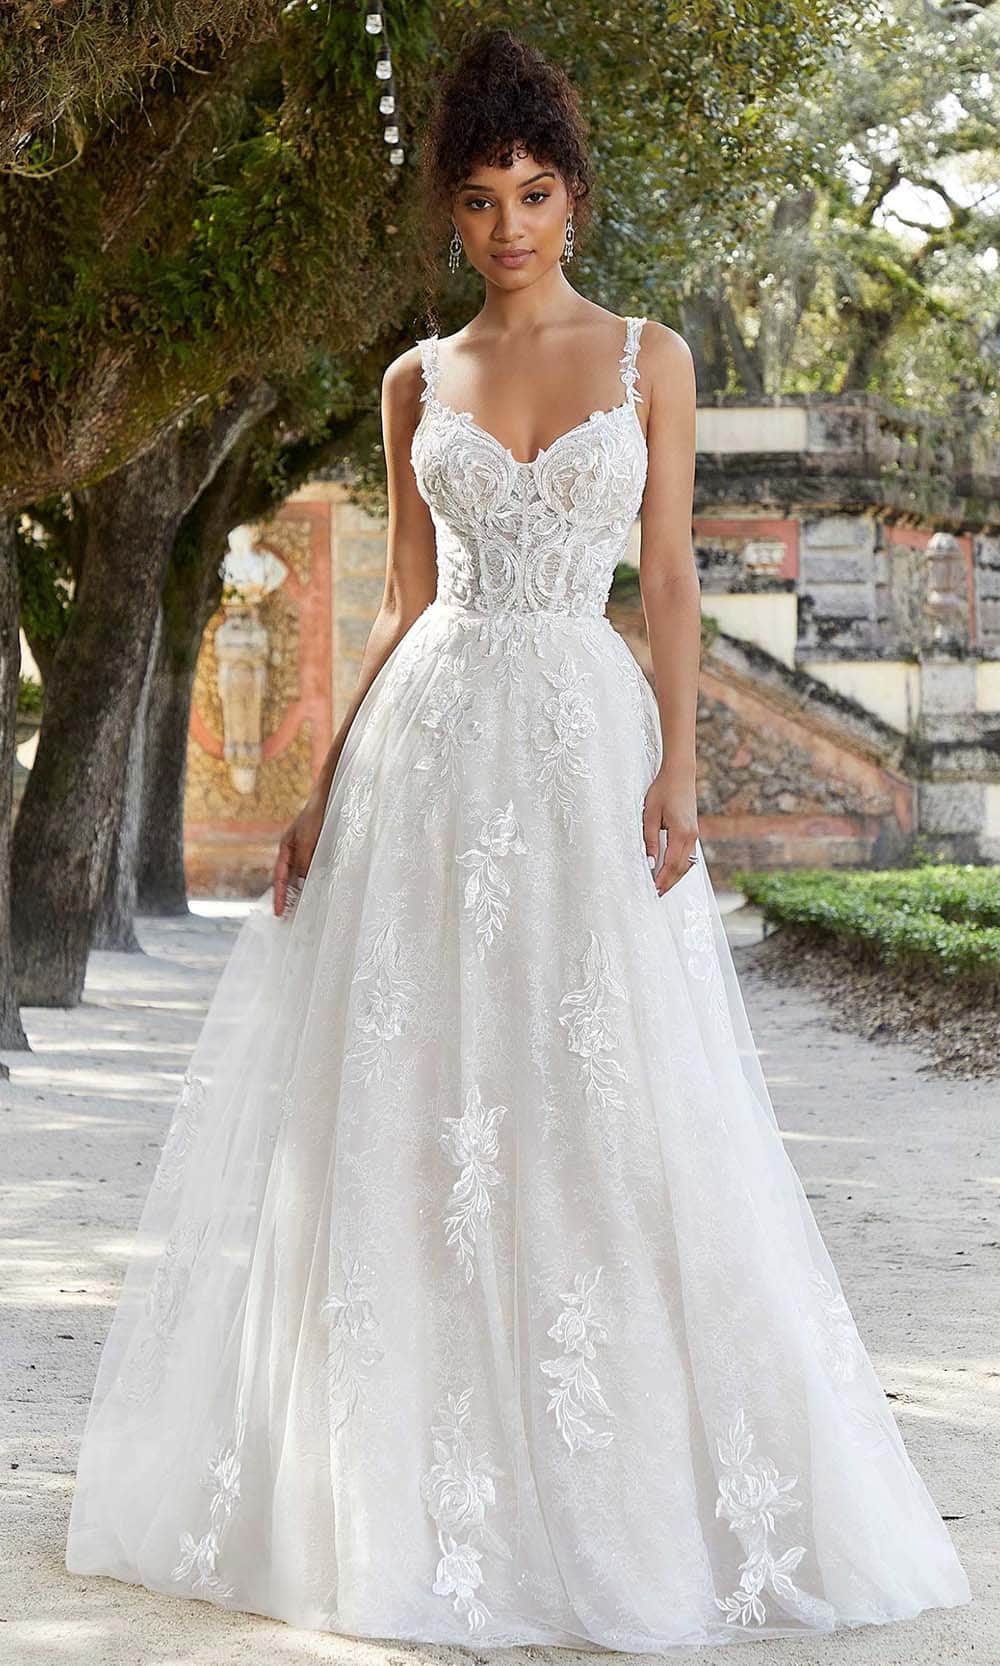 Mori Lee Bridal Gowns In London - Always and forever UK